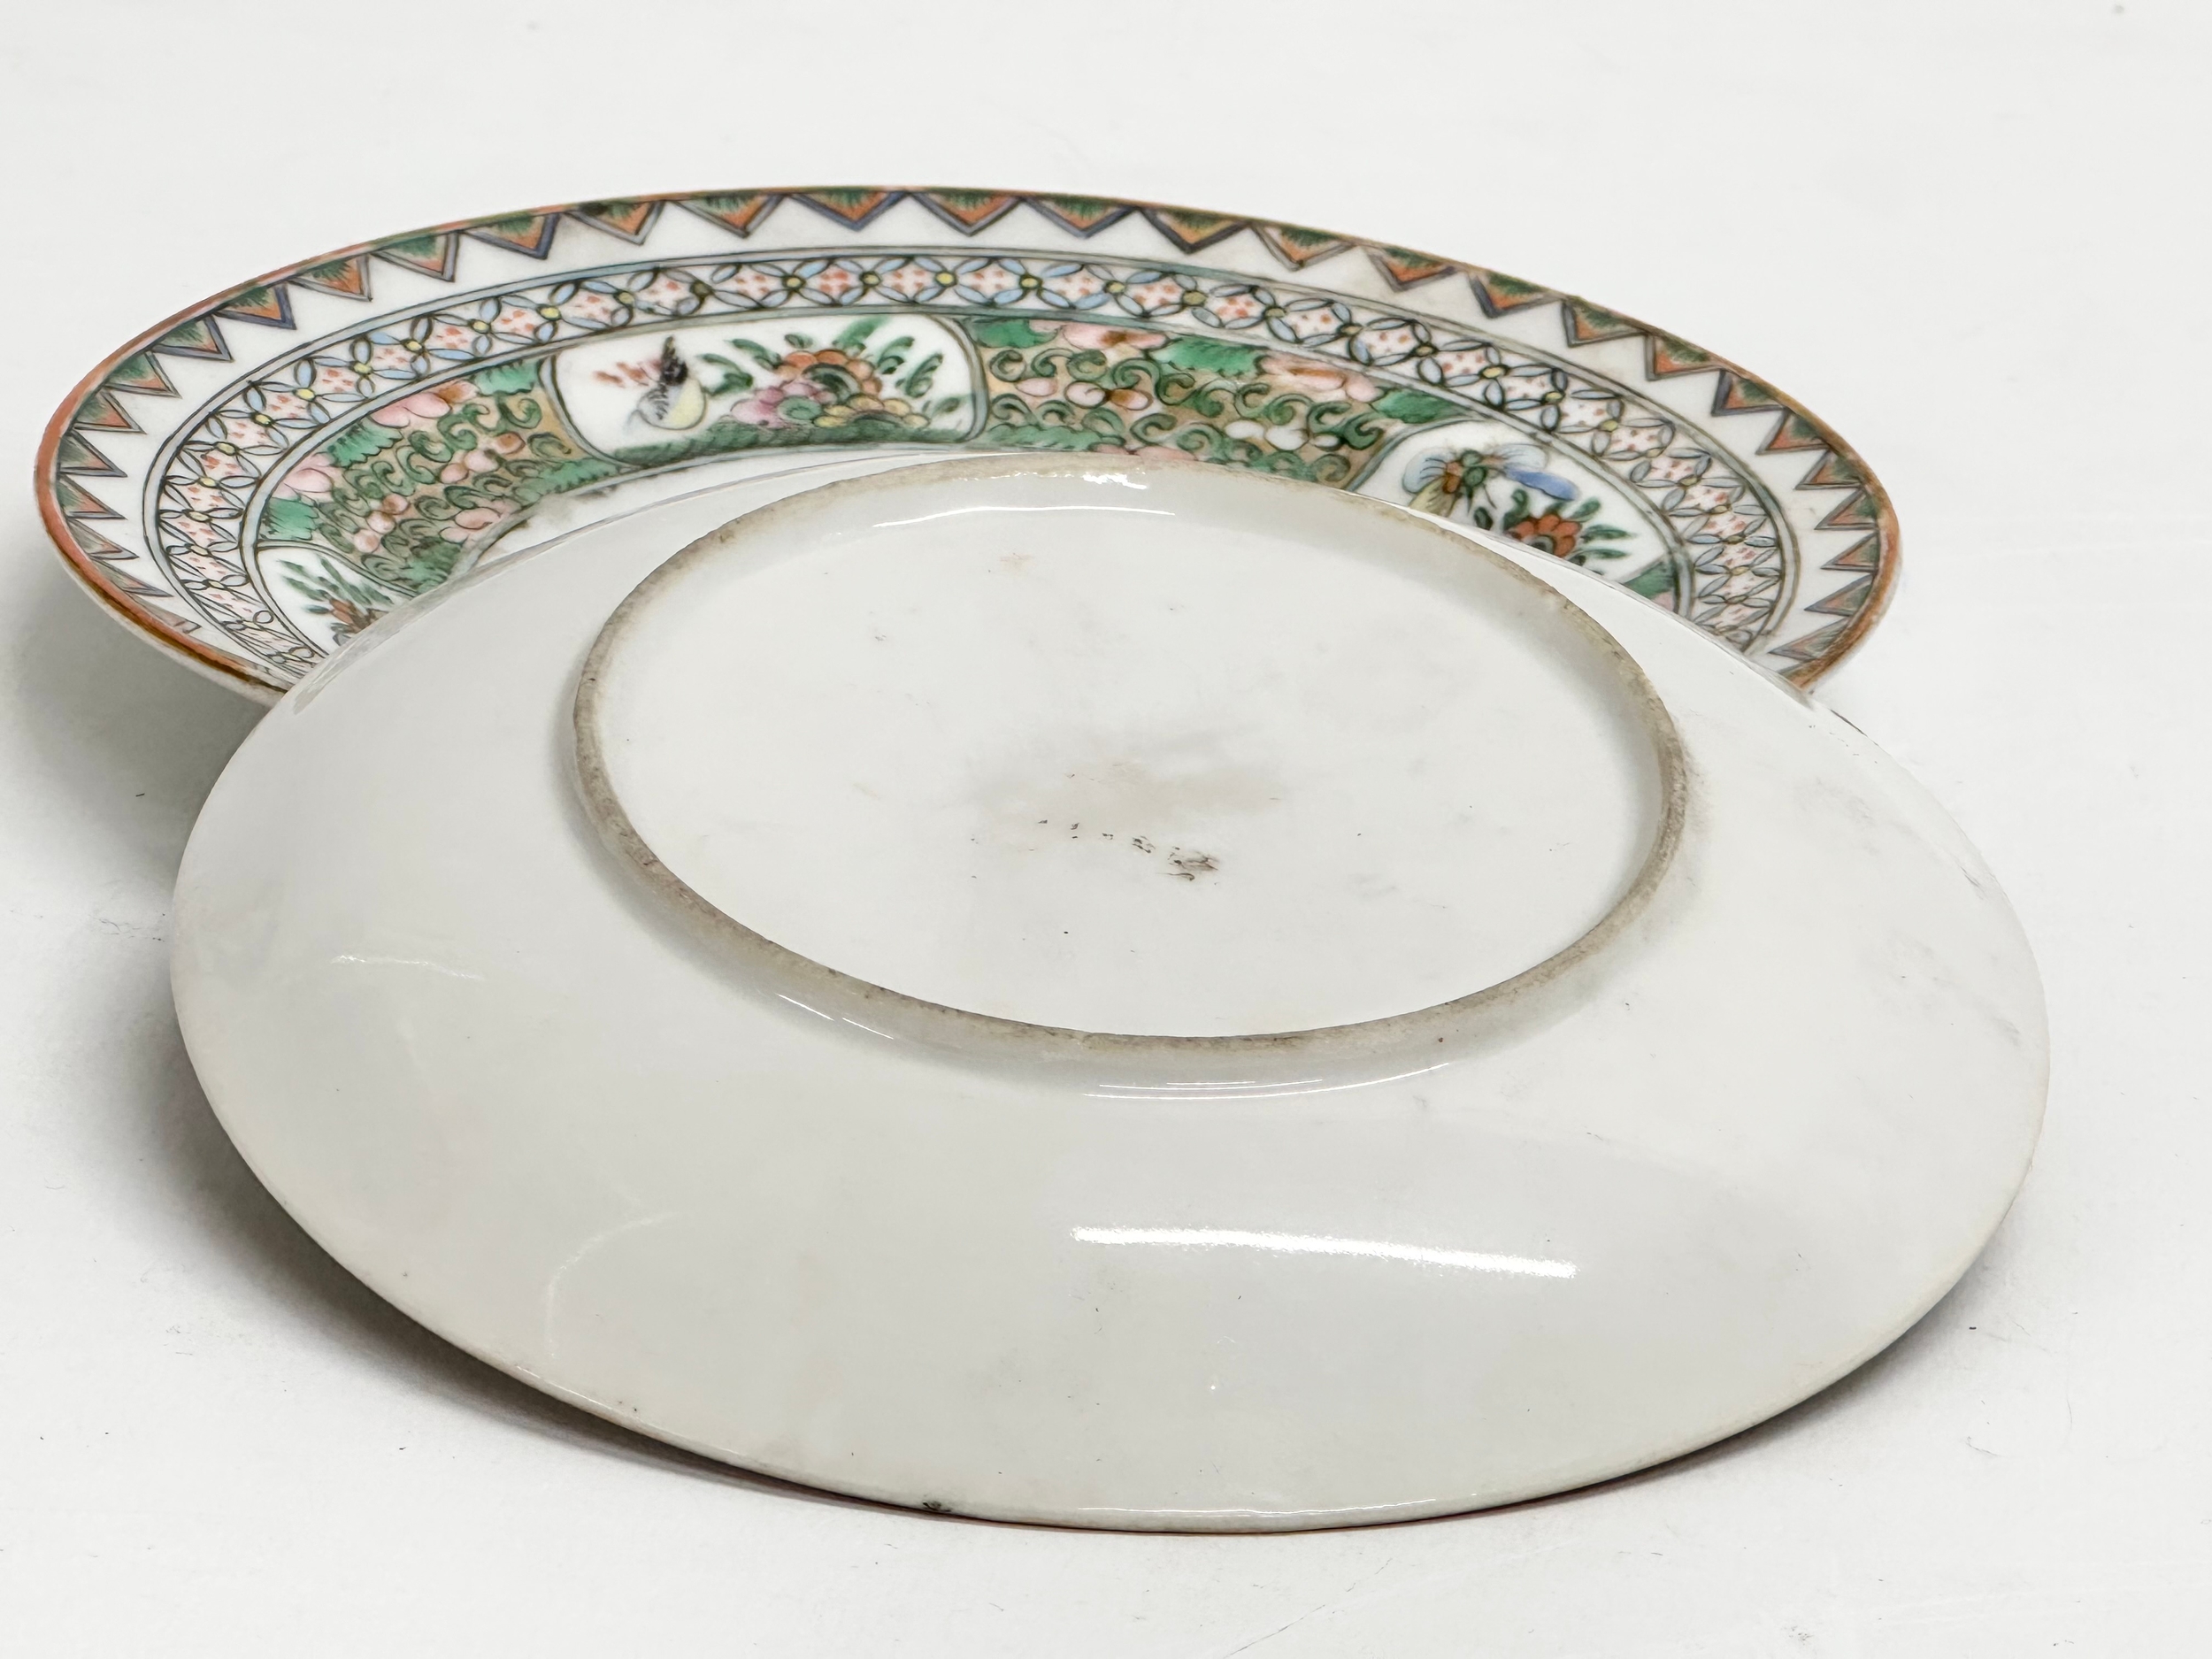 2 mid 19th century Chinese Emperor Xianfeng Rose Medallion saucer plates. 15.5cm. - Image 5 of 5